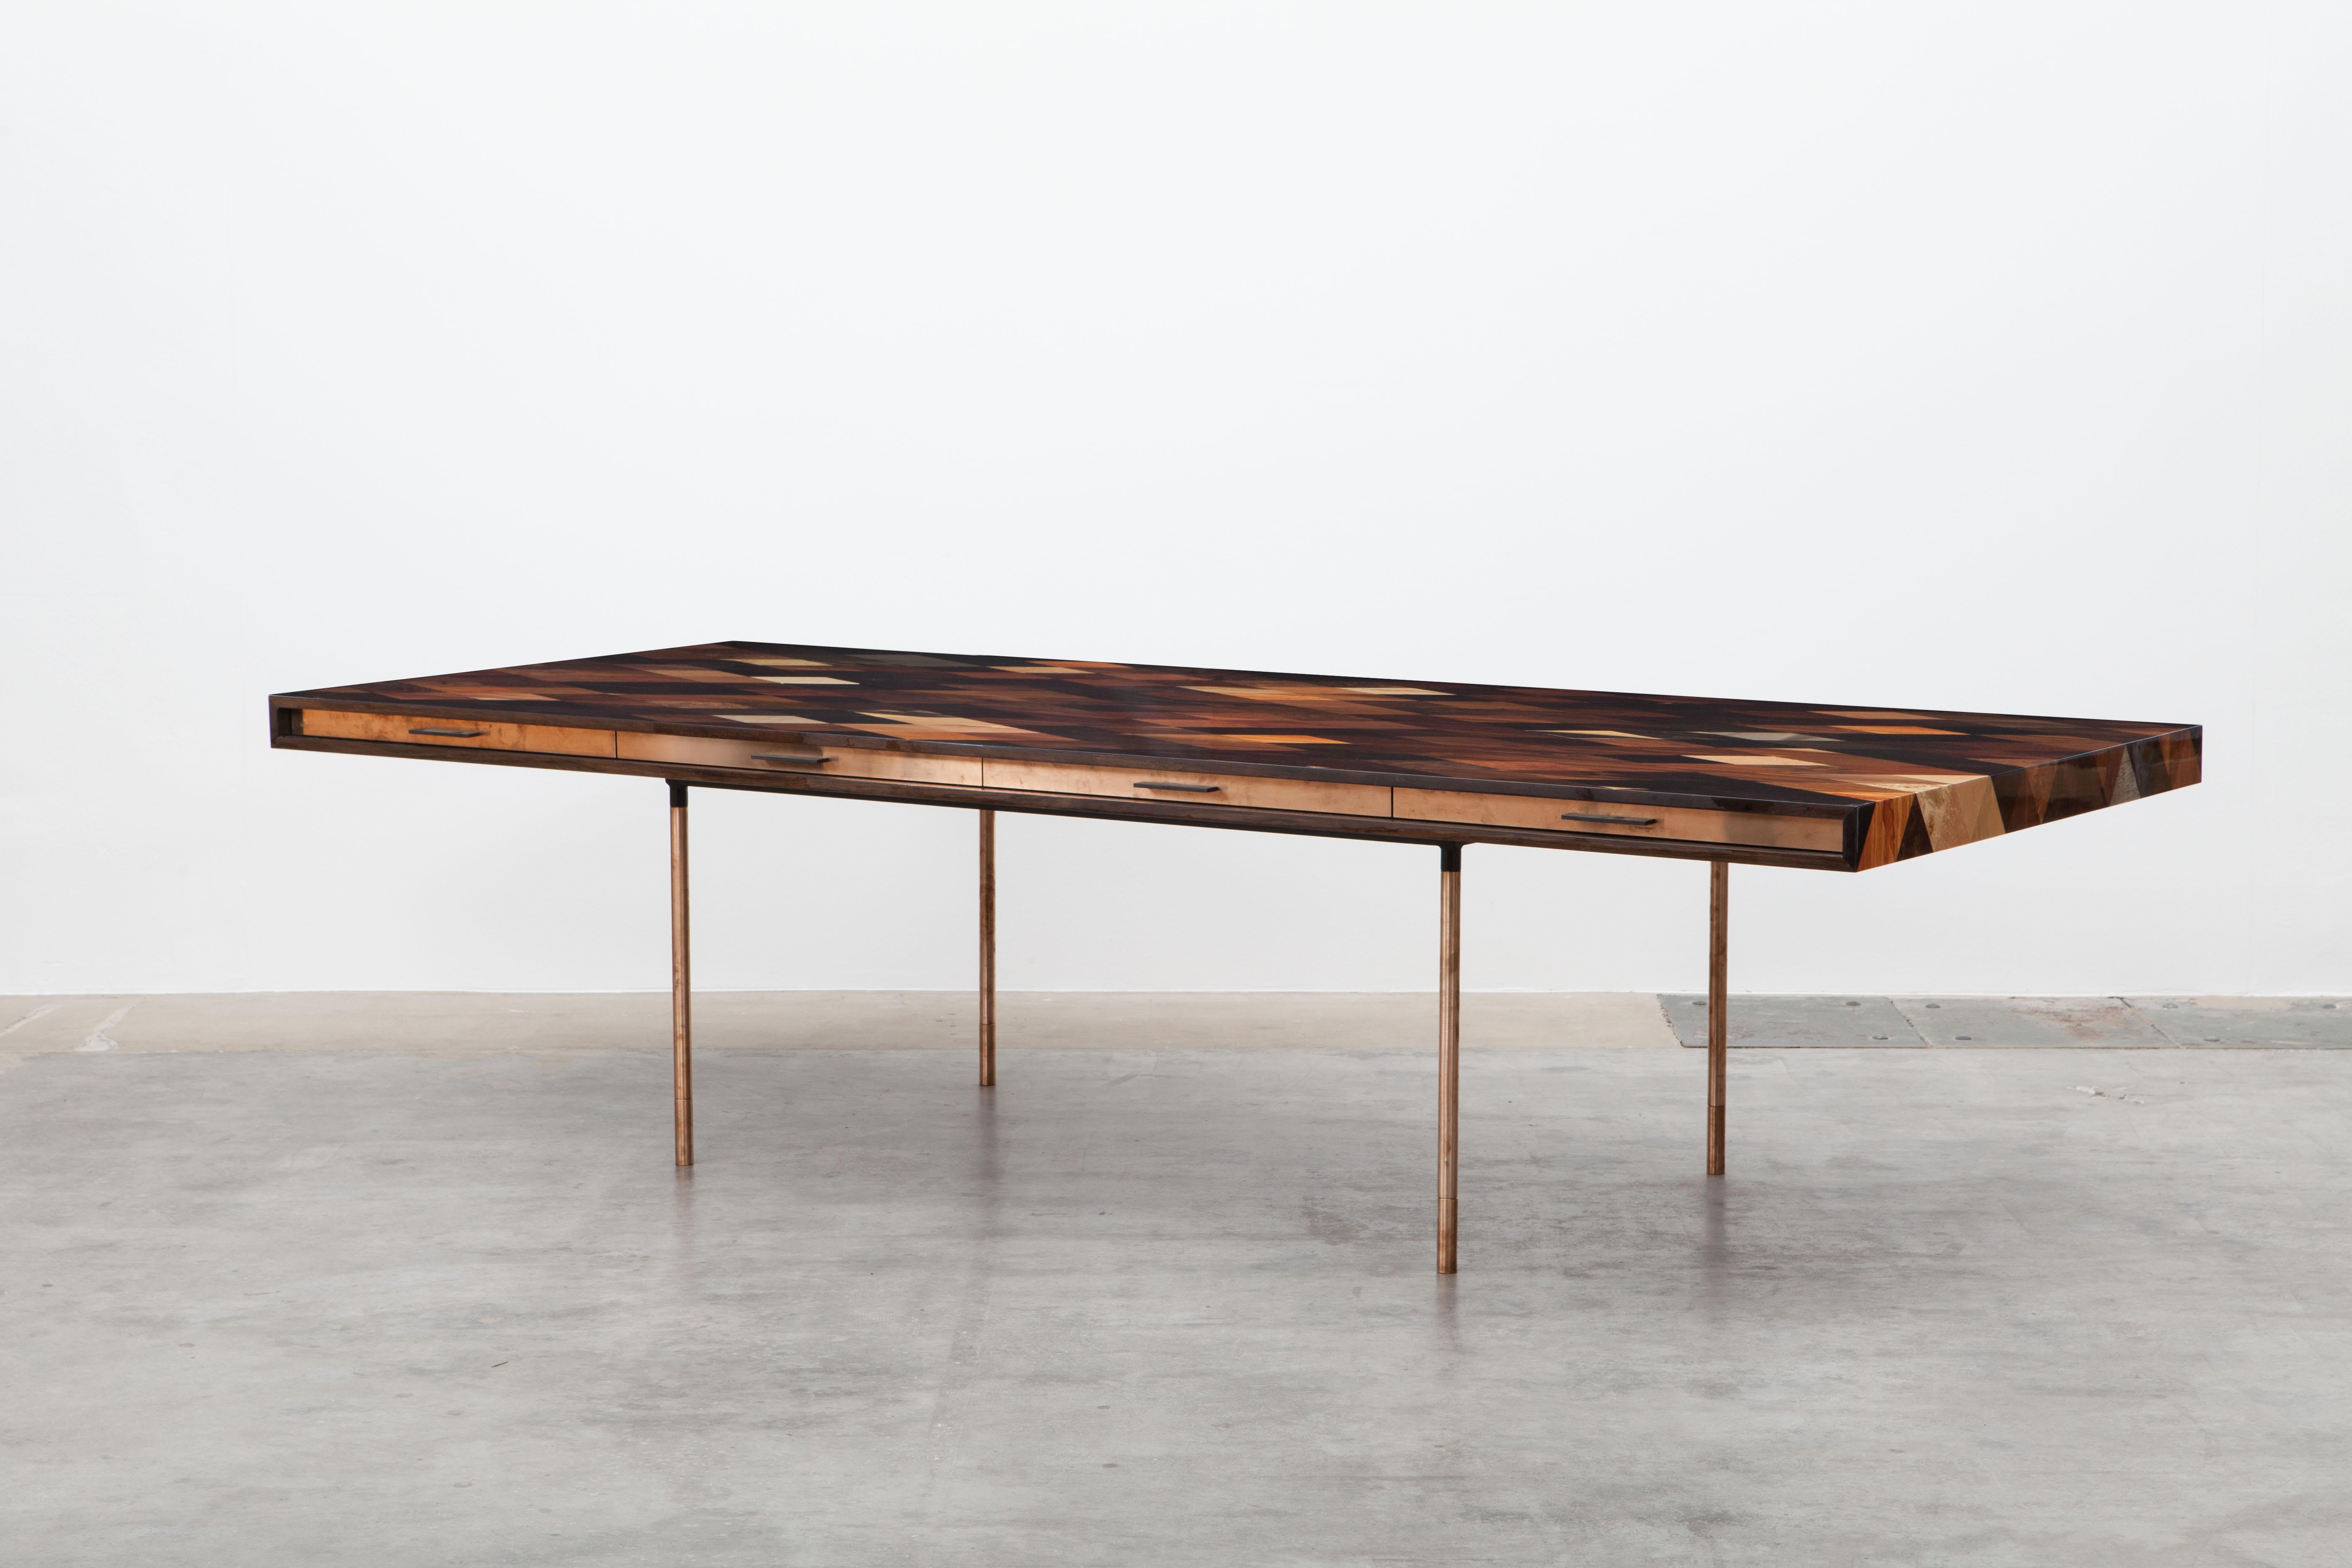 Desk by contemporary artist Johannes Hock, veneered tabletop in diamond pattern with thirty different types of wood. Four drawers on both front sides in bronze. Hidden access to electricity and USB slot under the pattern which can be adjusted to